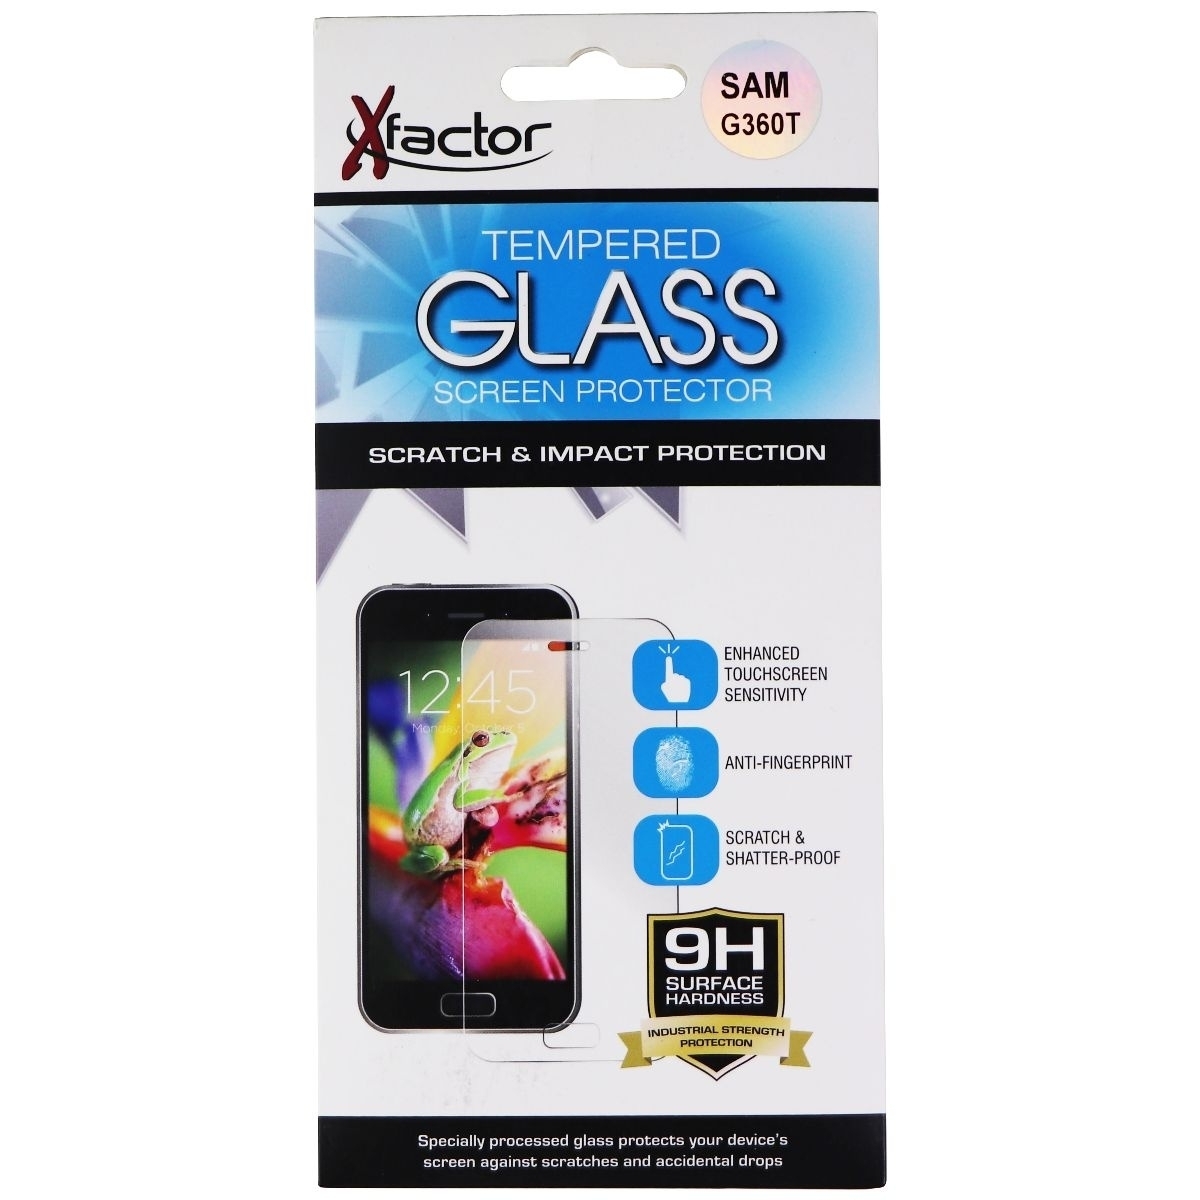 XFactor Tempered Glass For Samsung Galaxy Core Prime (G360T) - Clear